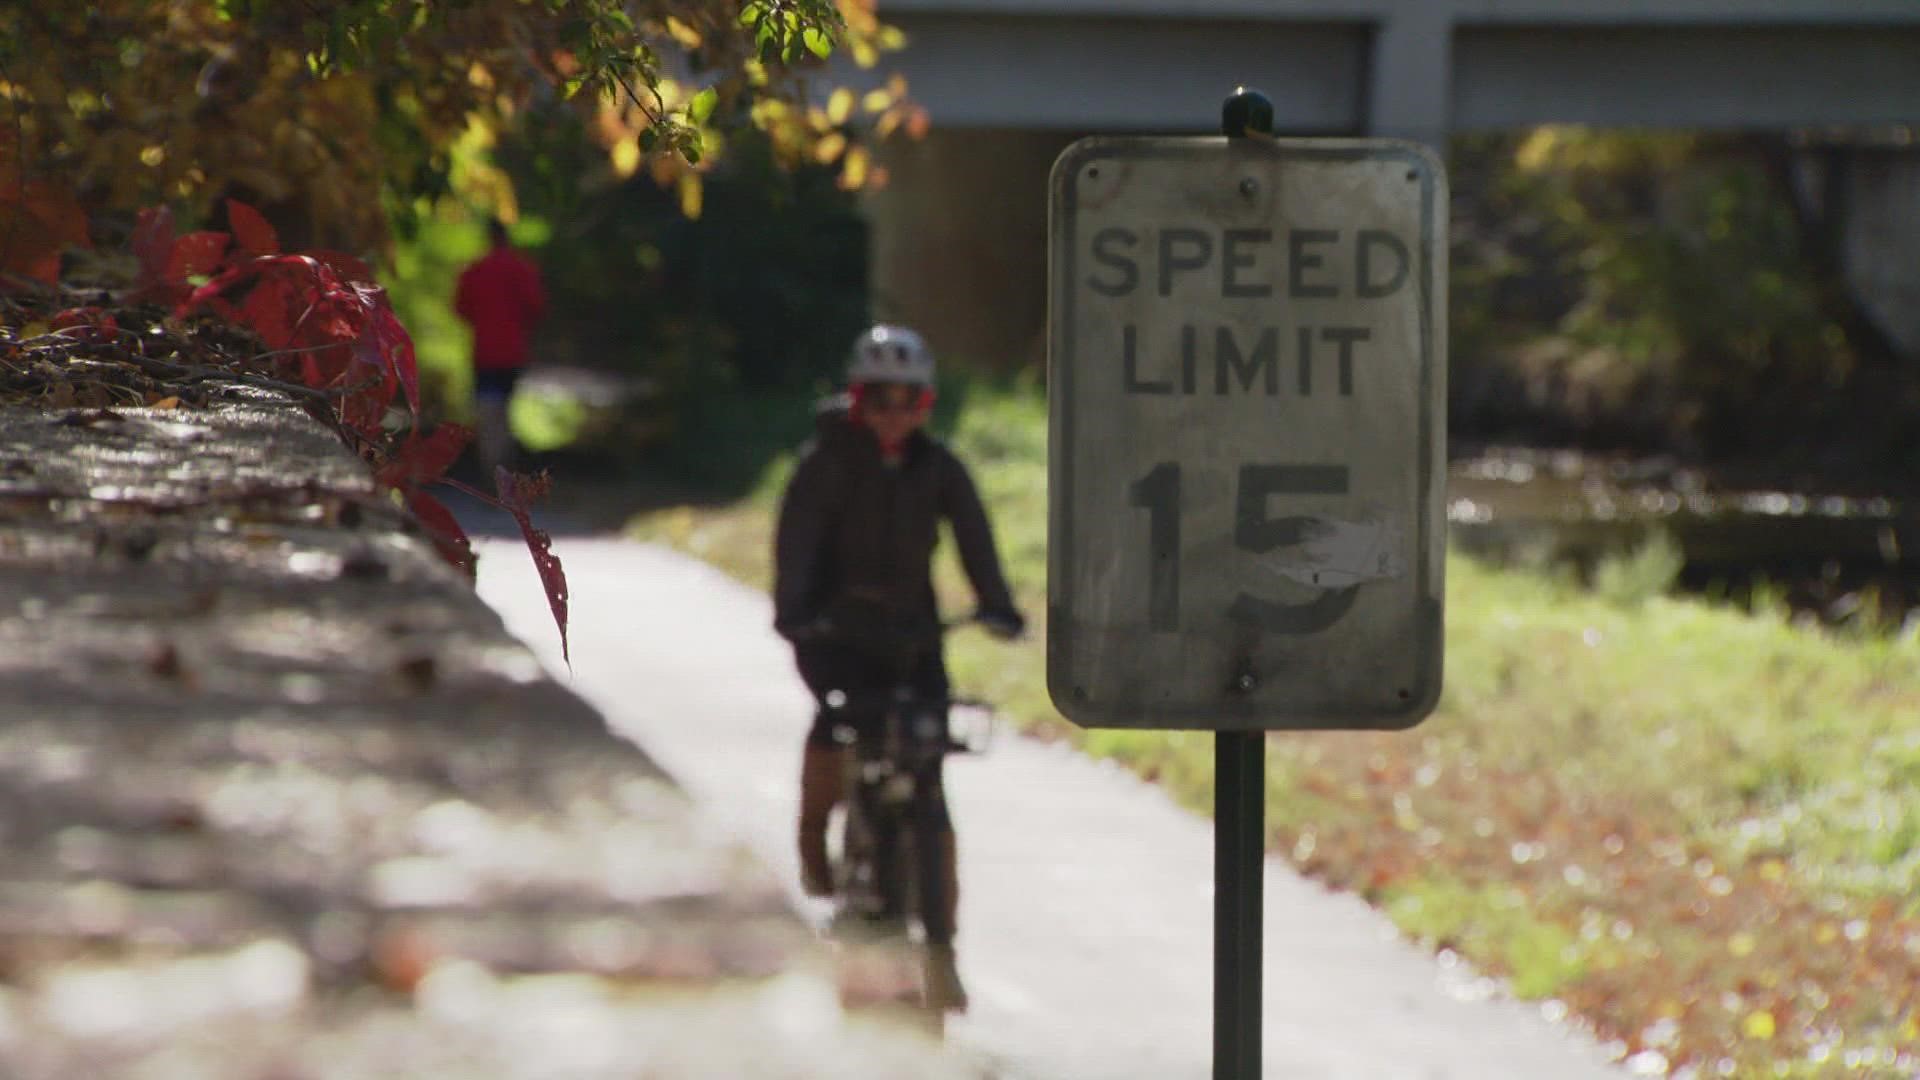 As thousands of people in Denver take advantage of city rebates to buy e-bikes, 9NEWS has learned park rangers are refocusing on speed enforcement.